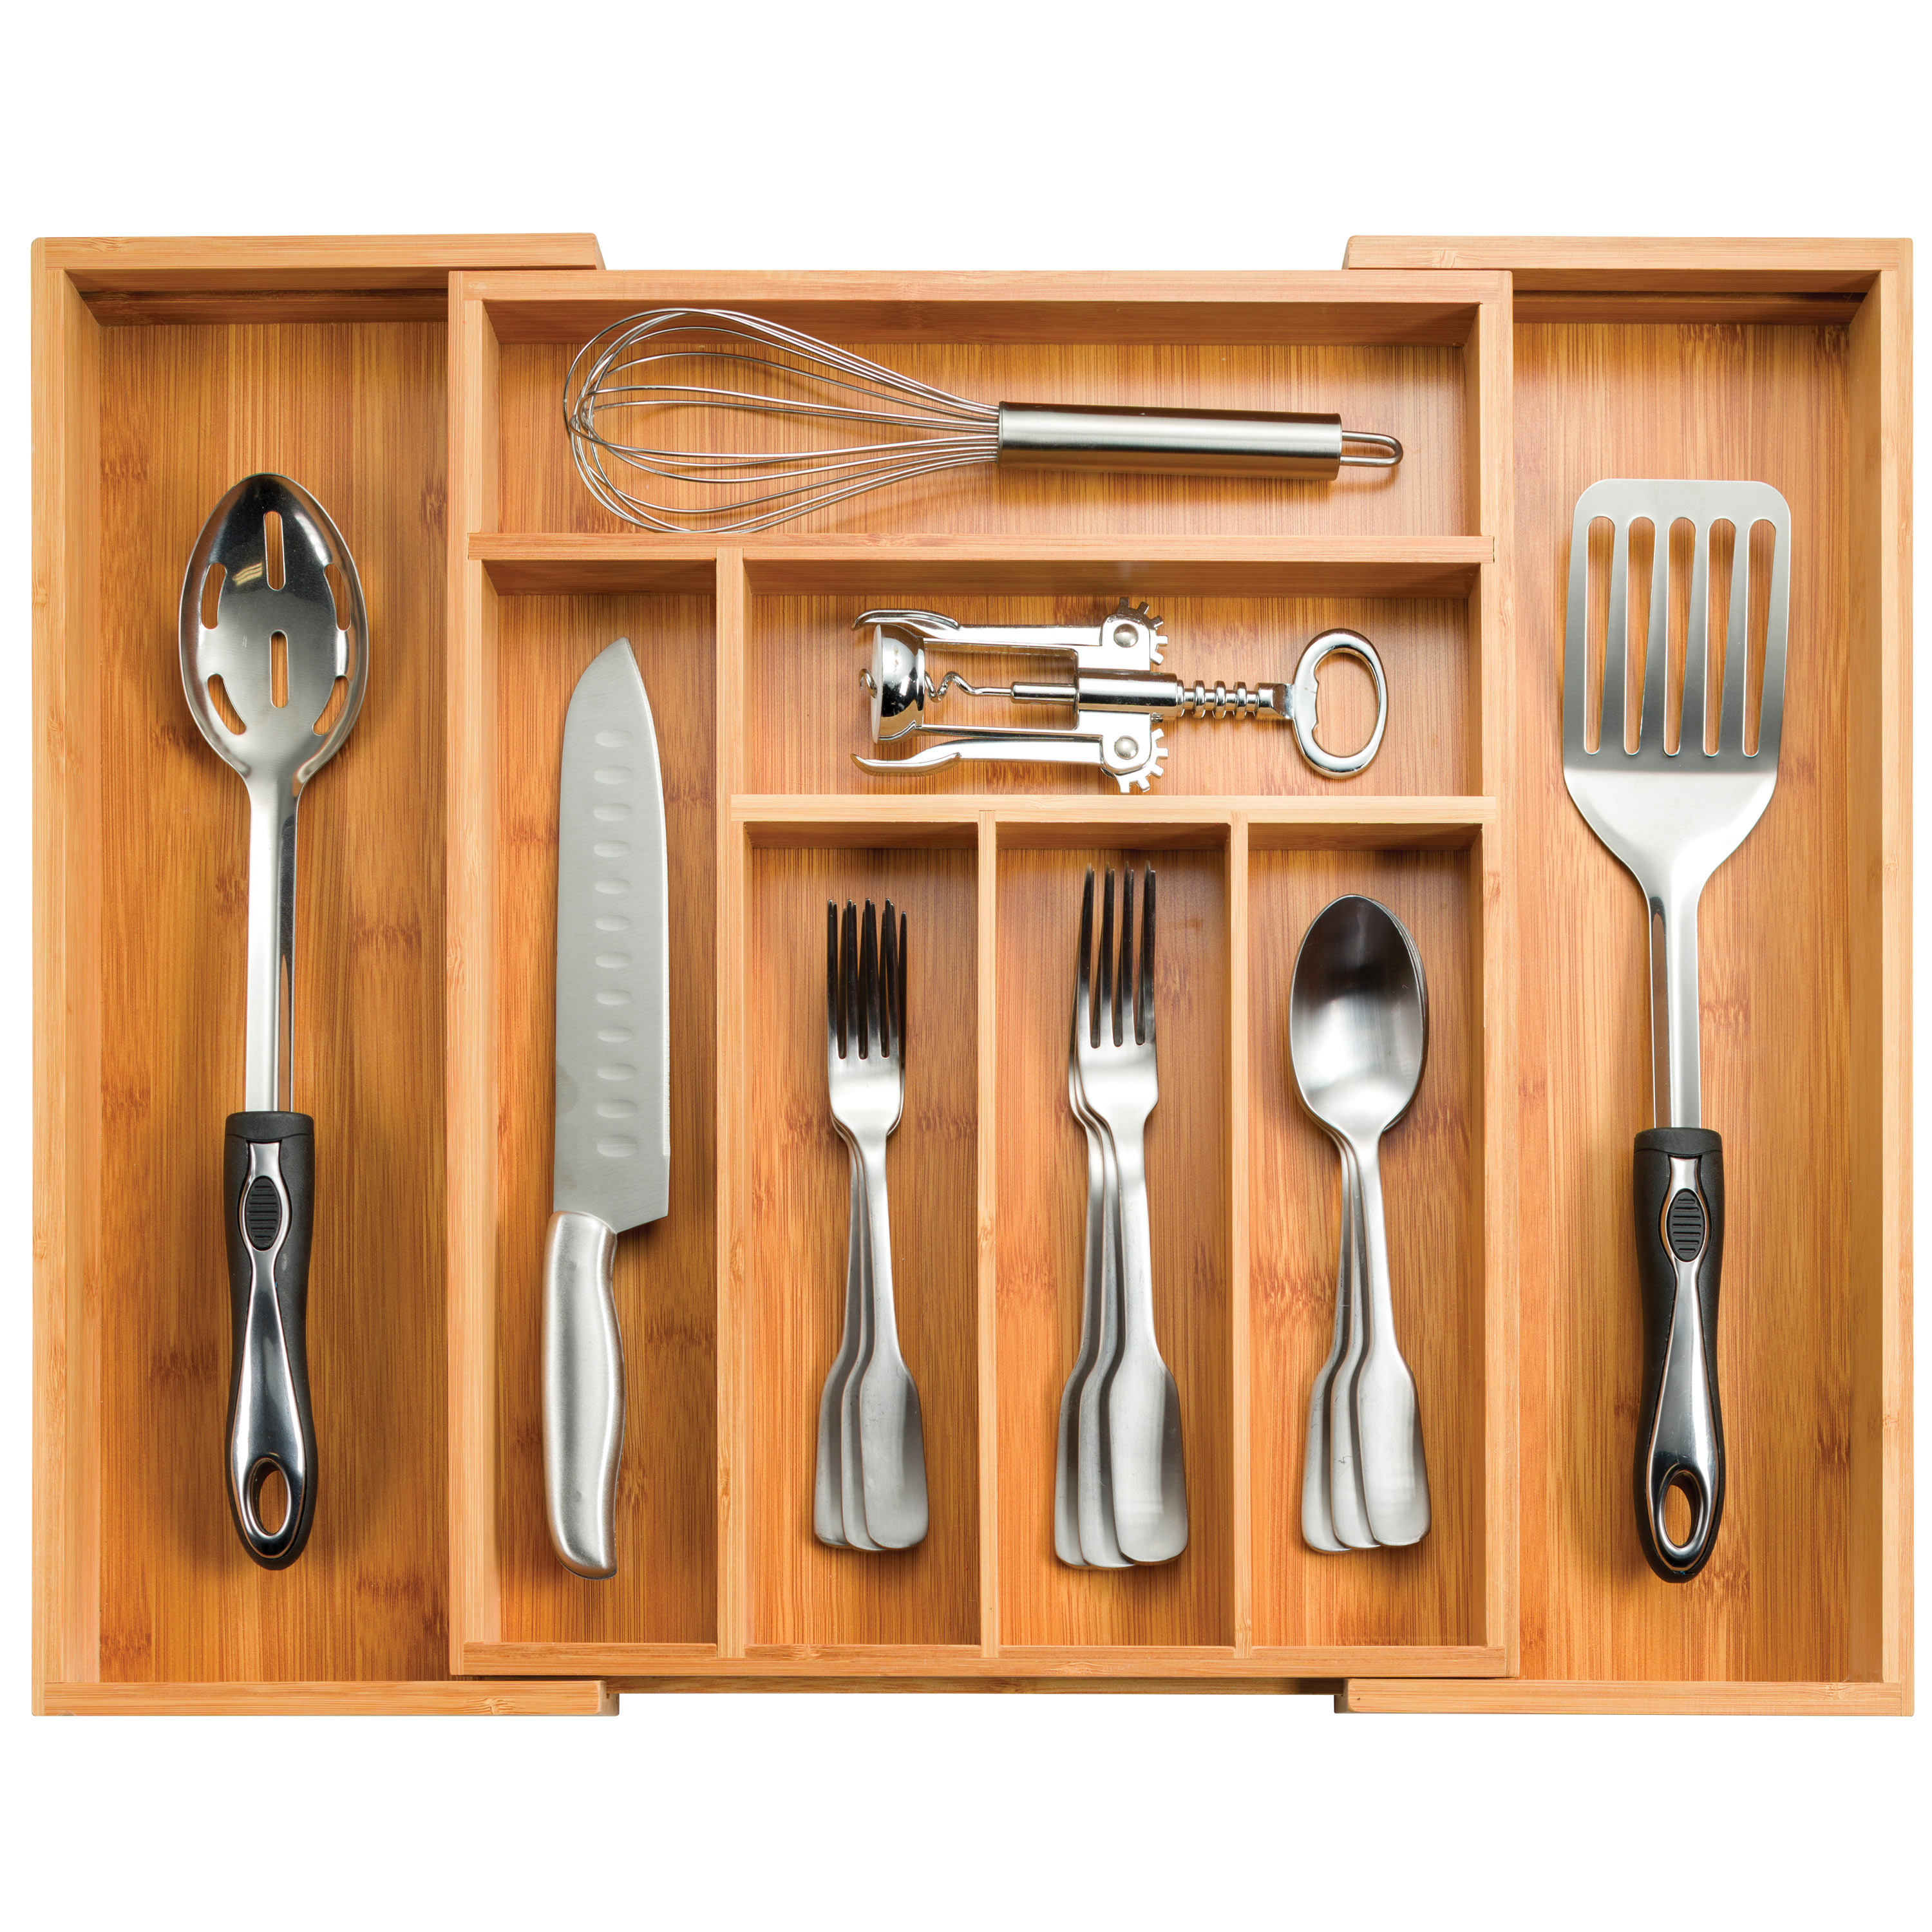 Expandable Kitchen Drawer Organizer - 8 Compartment Utensil Cutlery Tray - image 1 of 8